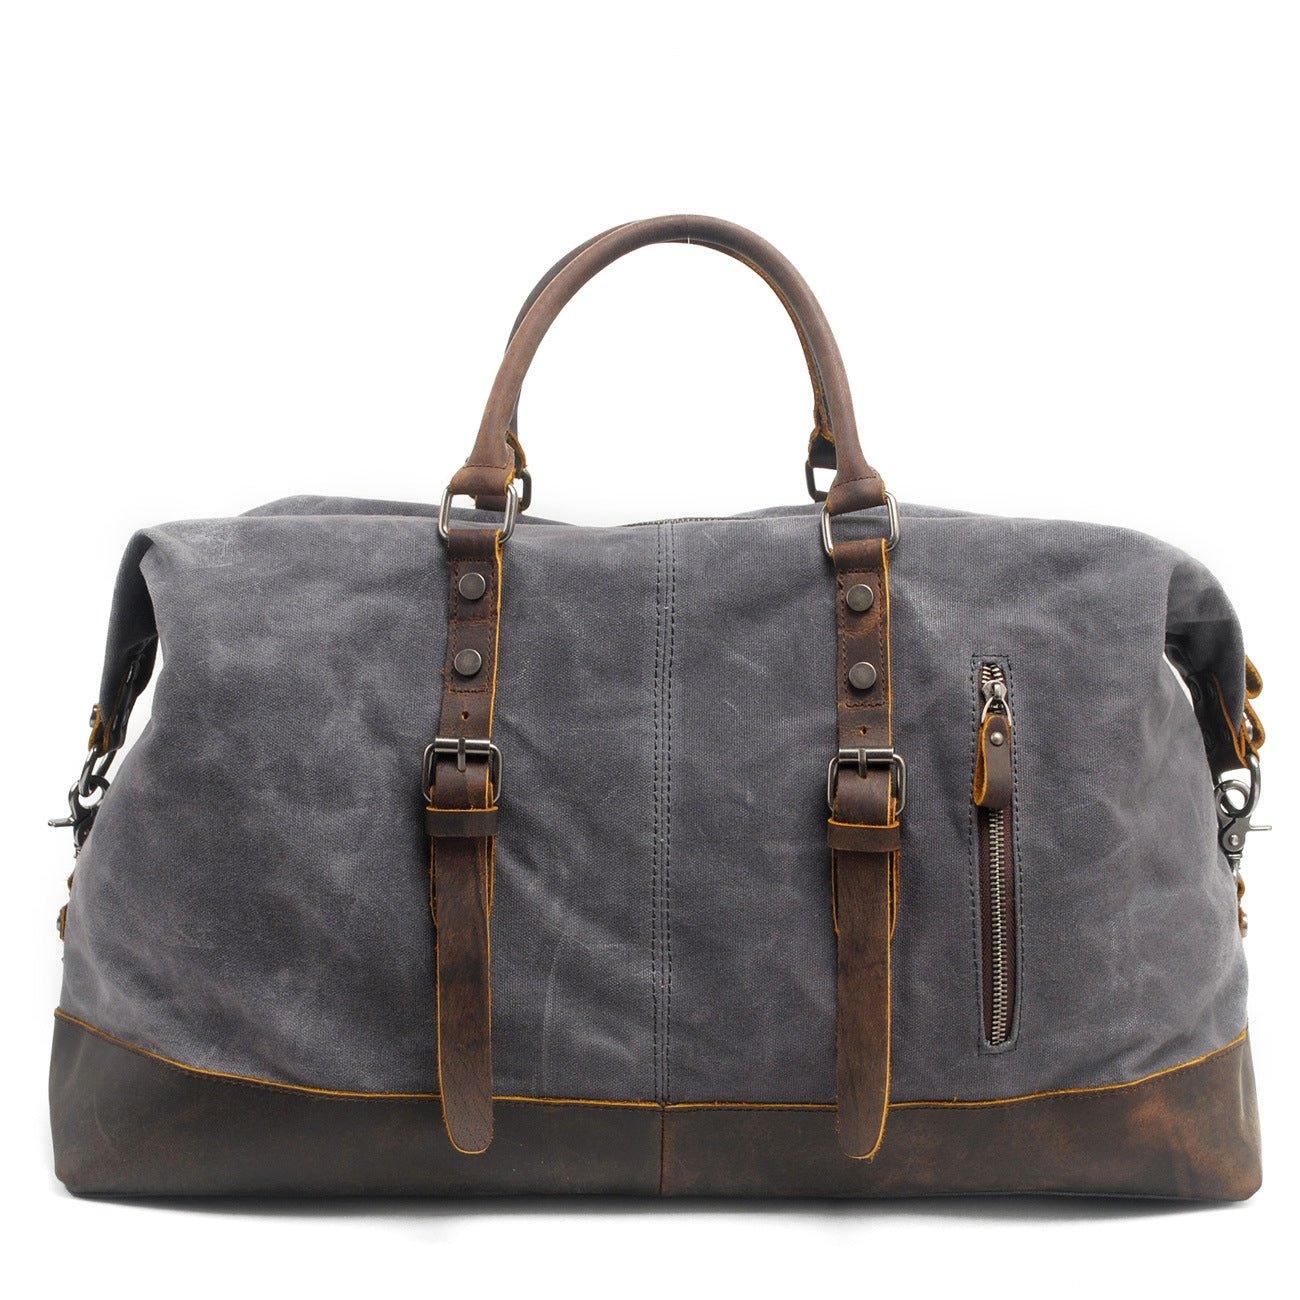 Buy Duffle Bag for Men Waterproof Genuine Leather Canvas Travel Duffel Bags  for Women Overnight Weekender Bag for Traveling, 1-Grey, Large, Vintage at